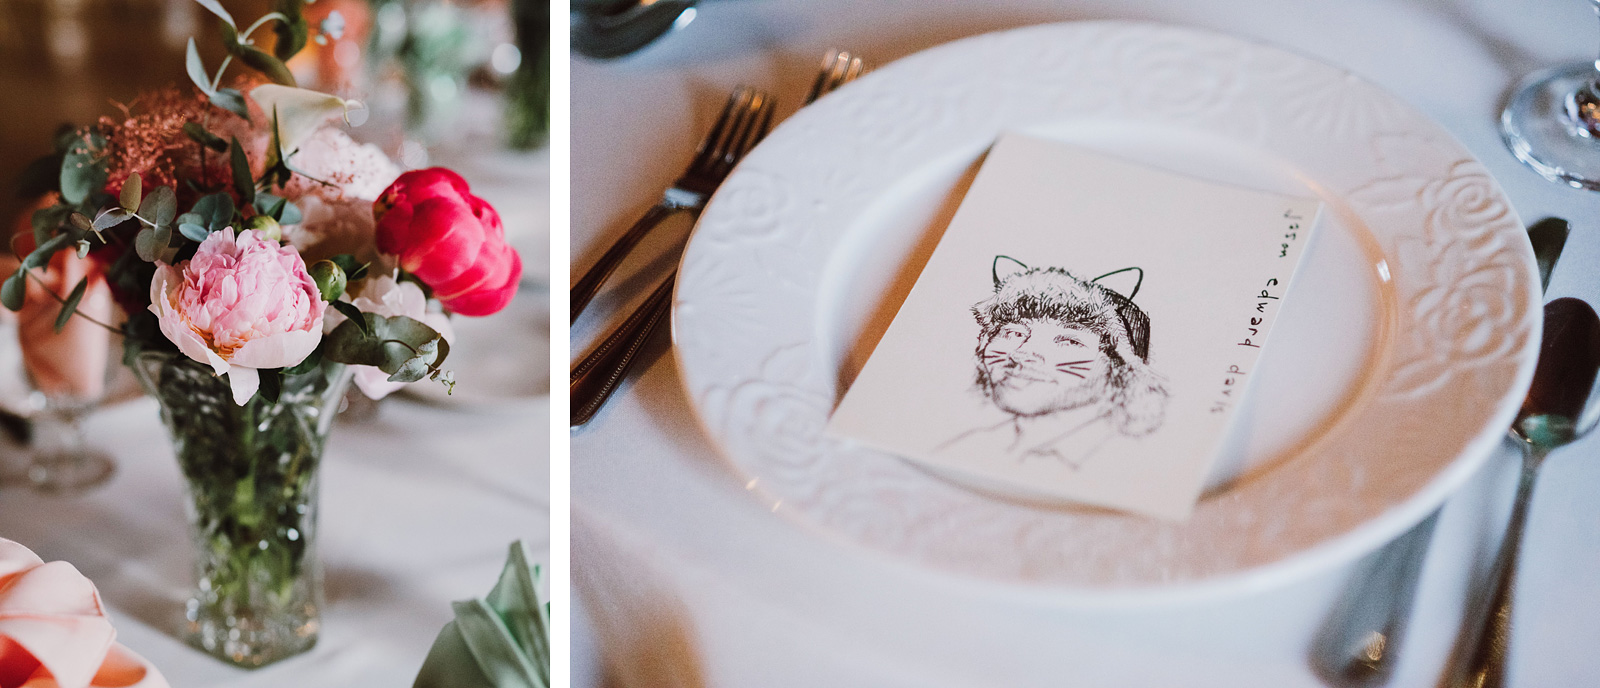 Polaris Hall Wedding decorations with drawings of guests